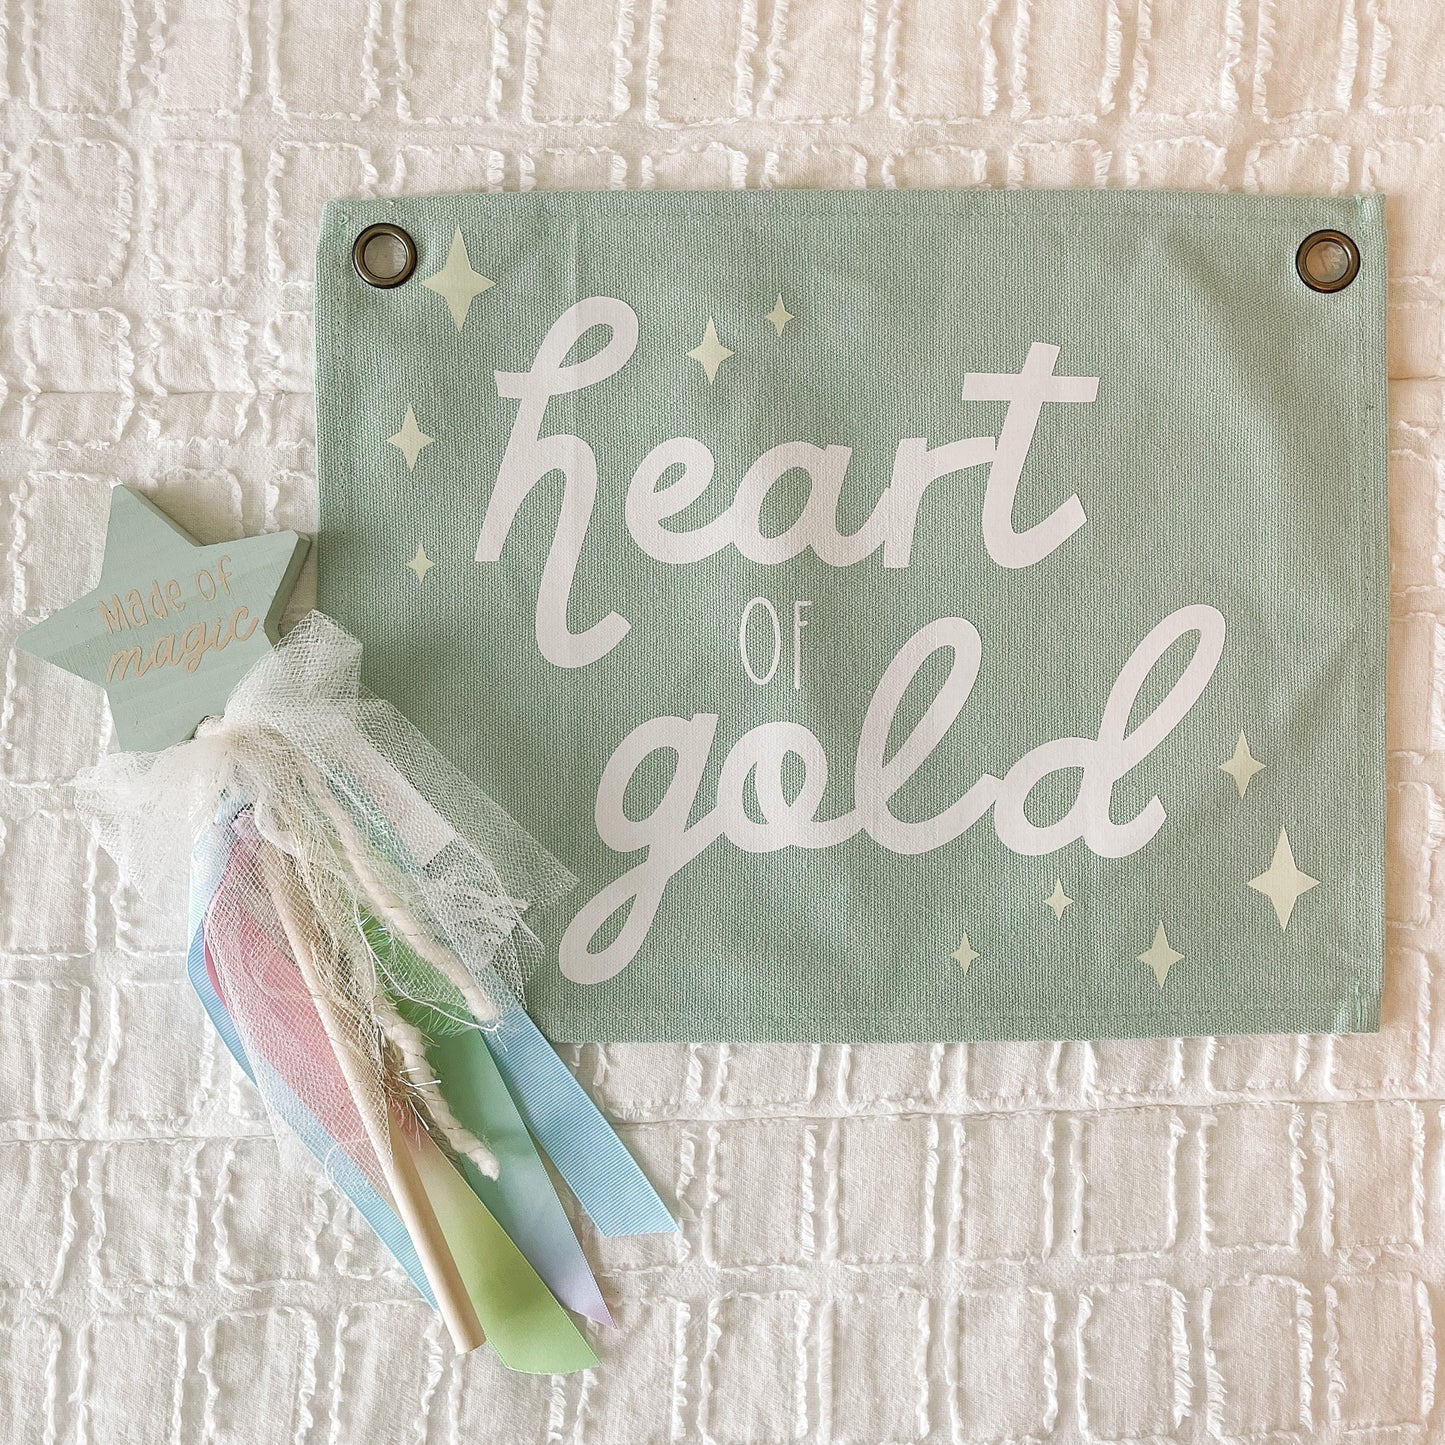 Heart of Gold Midi Canvas Banner